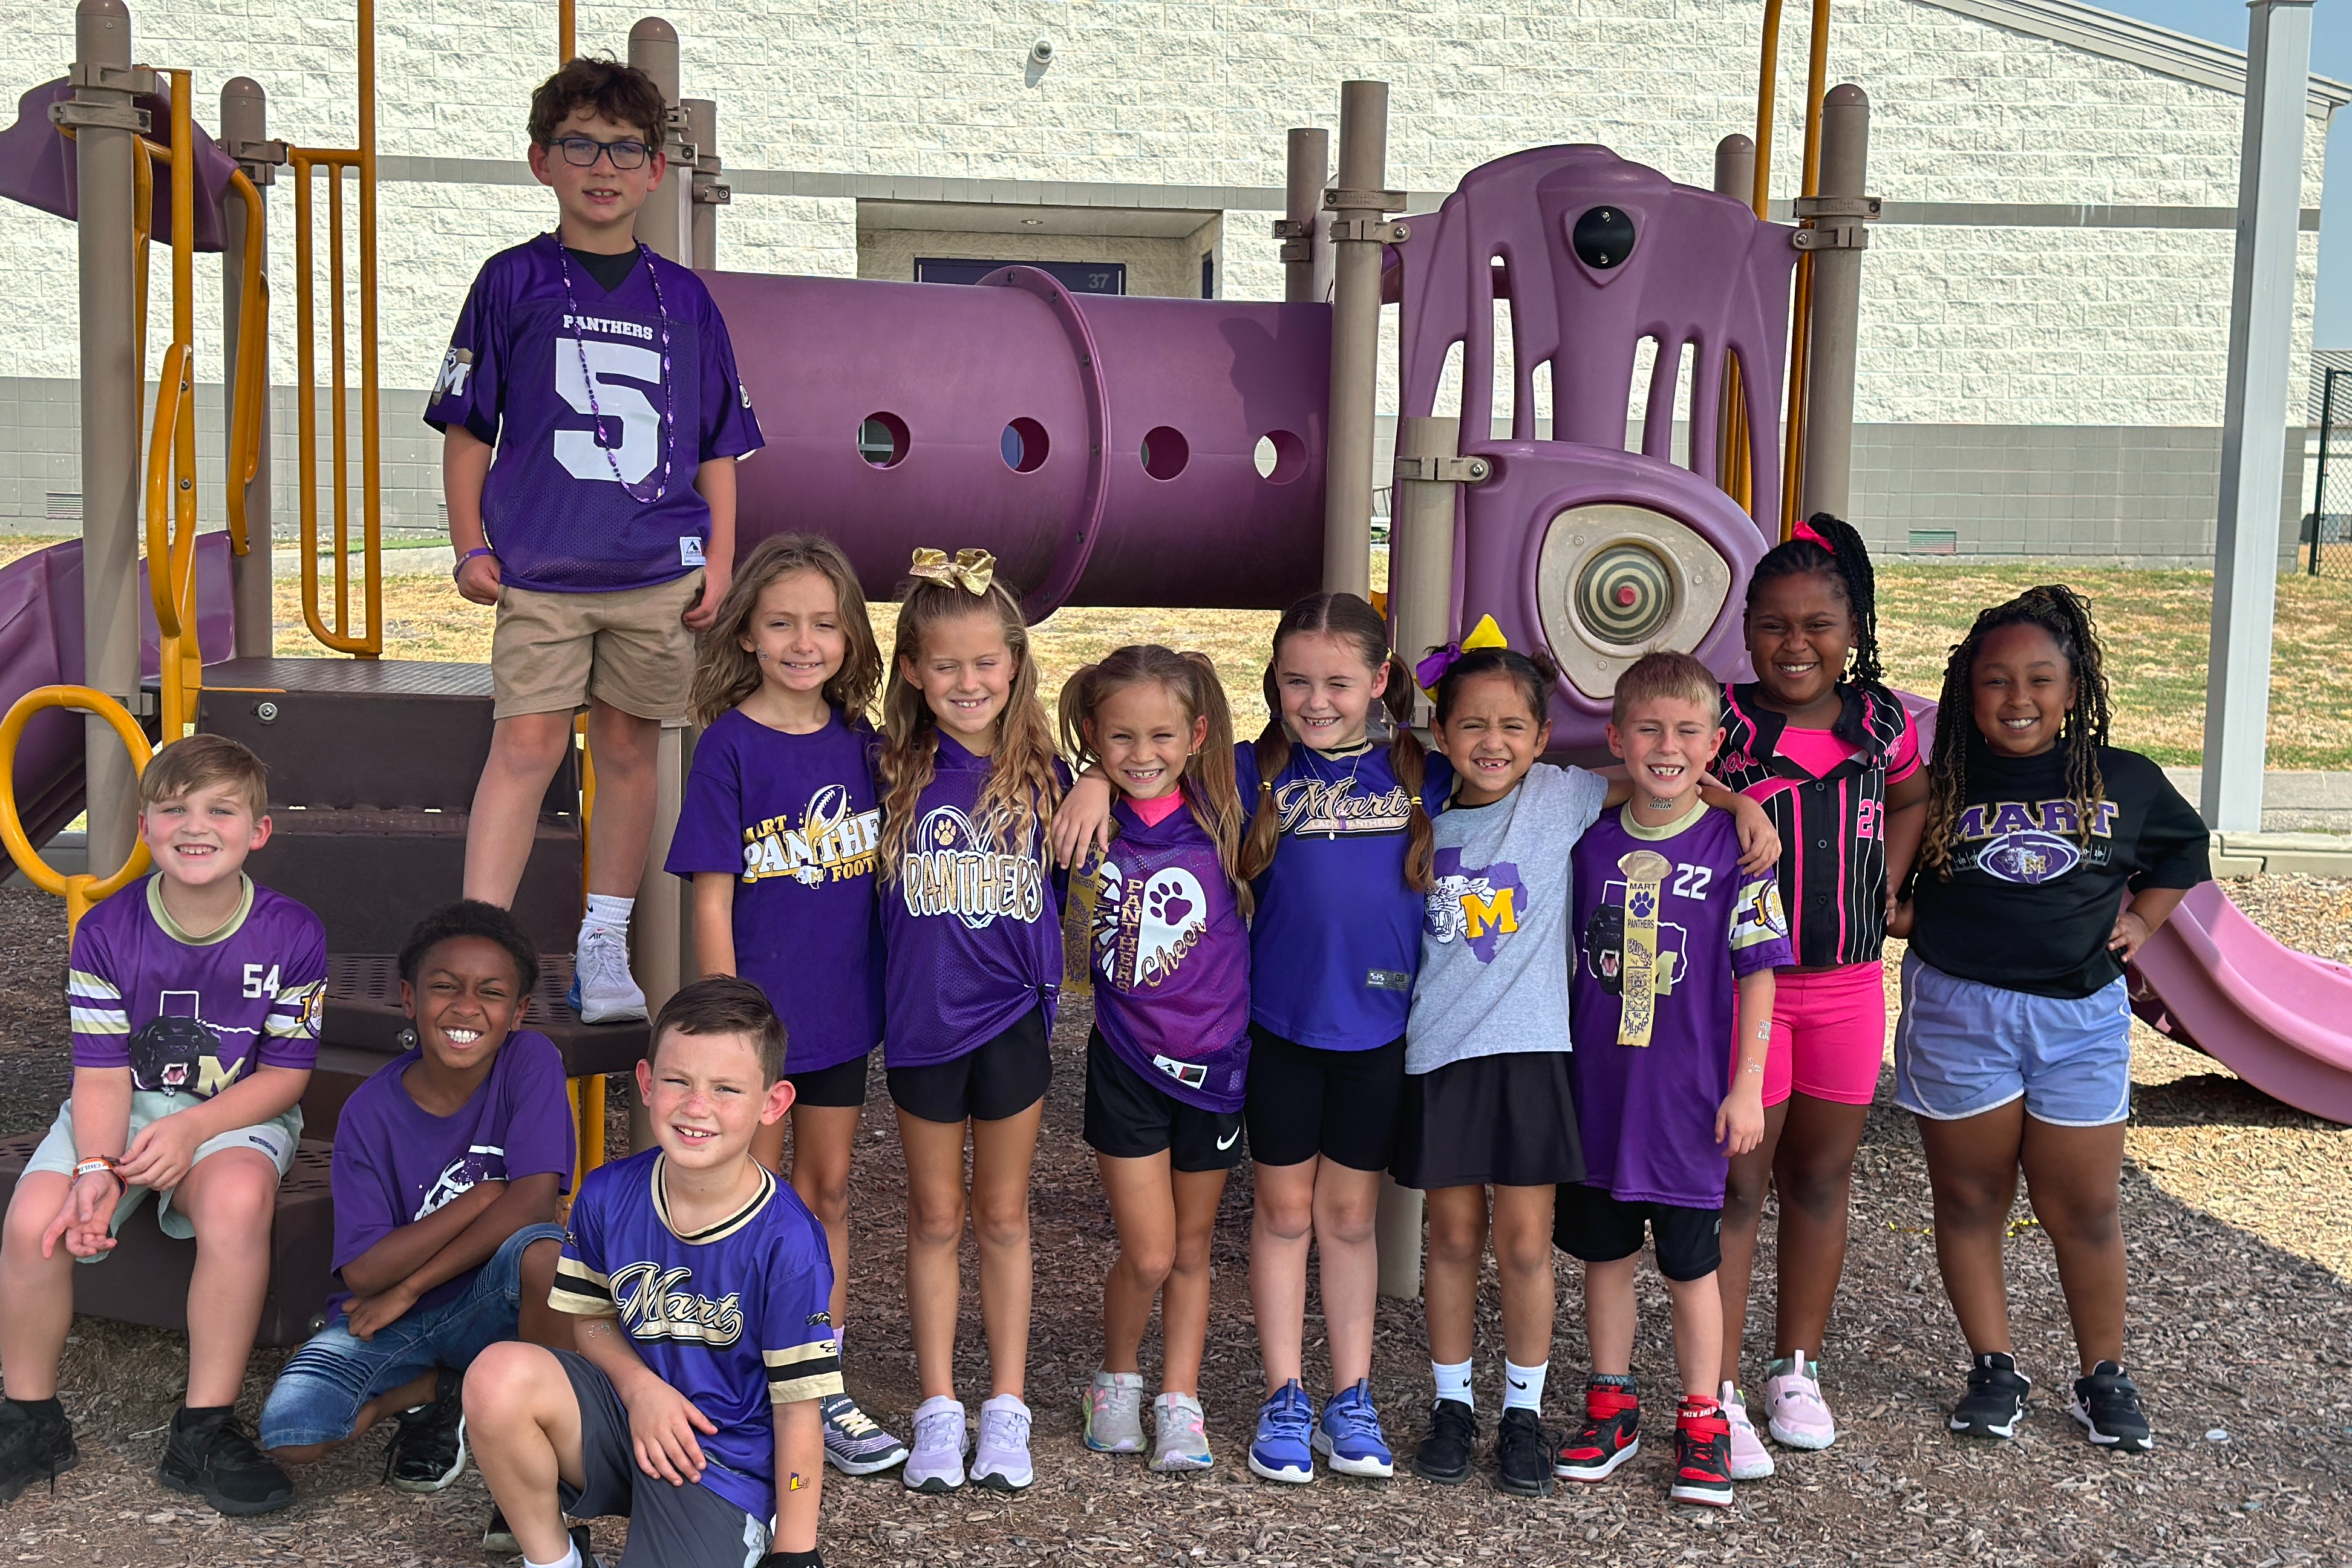 Our #PantherVillage was showing their Panther pride on Friday!